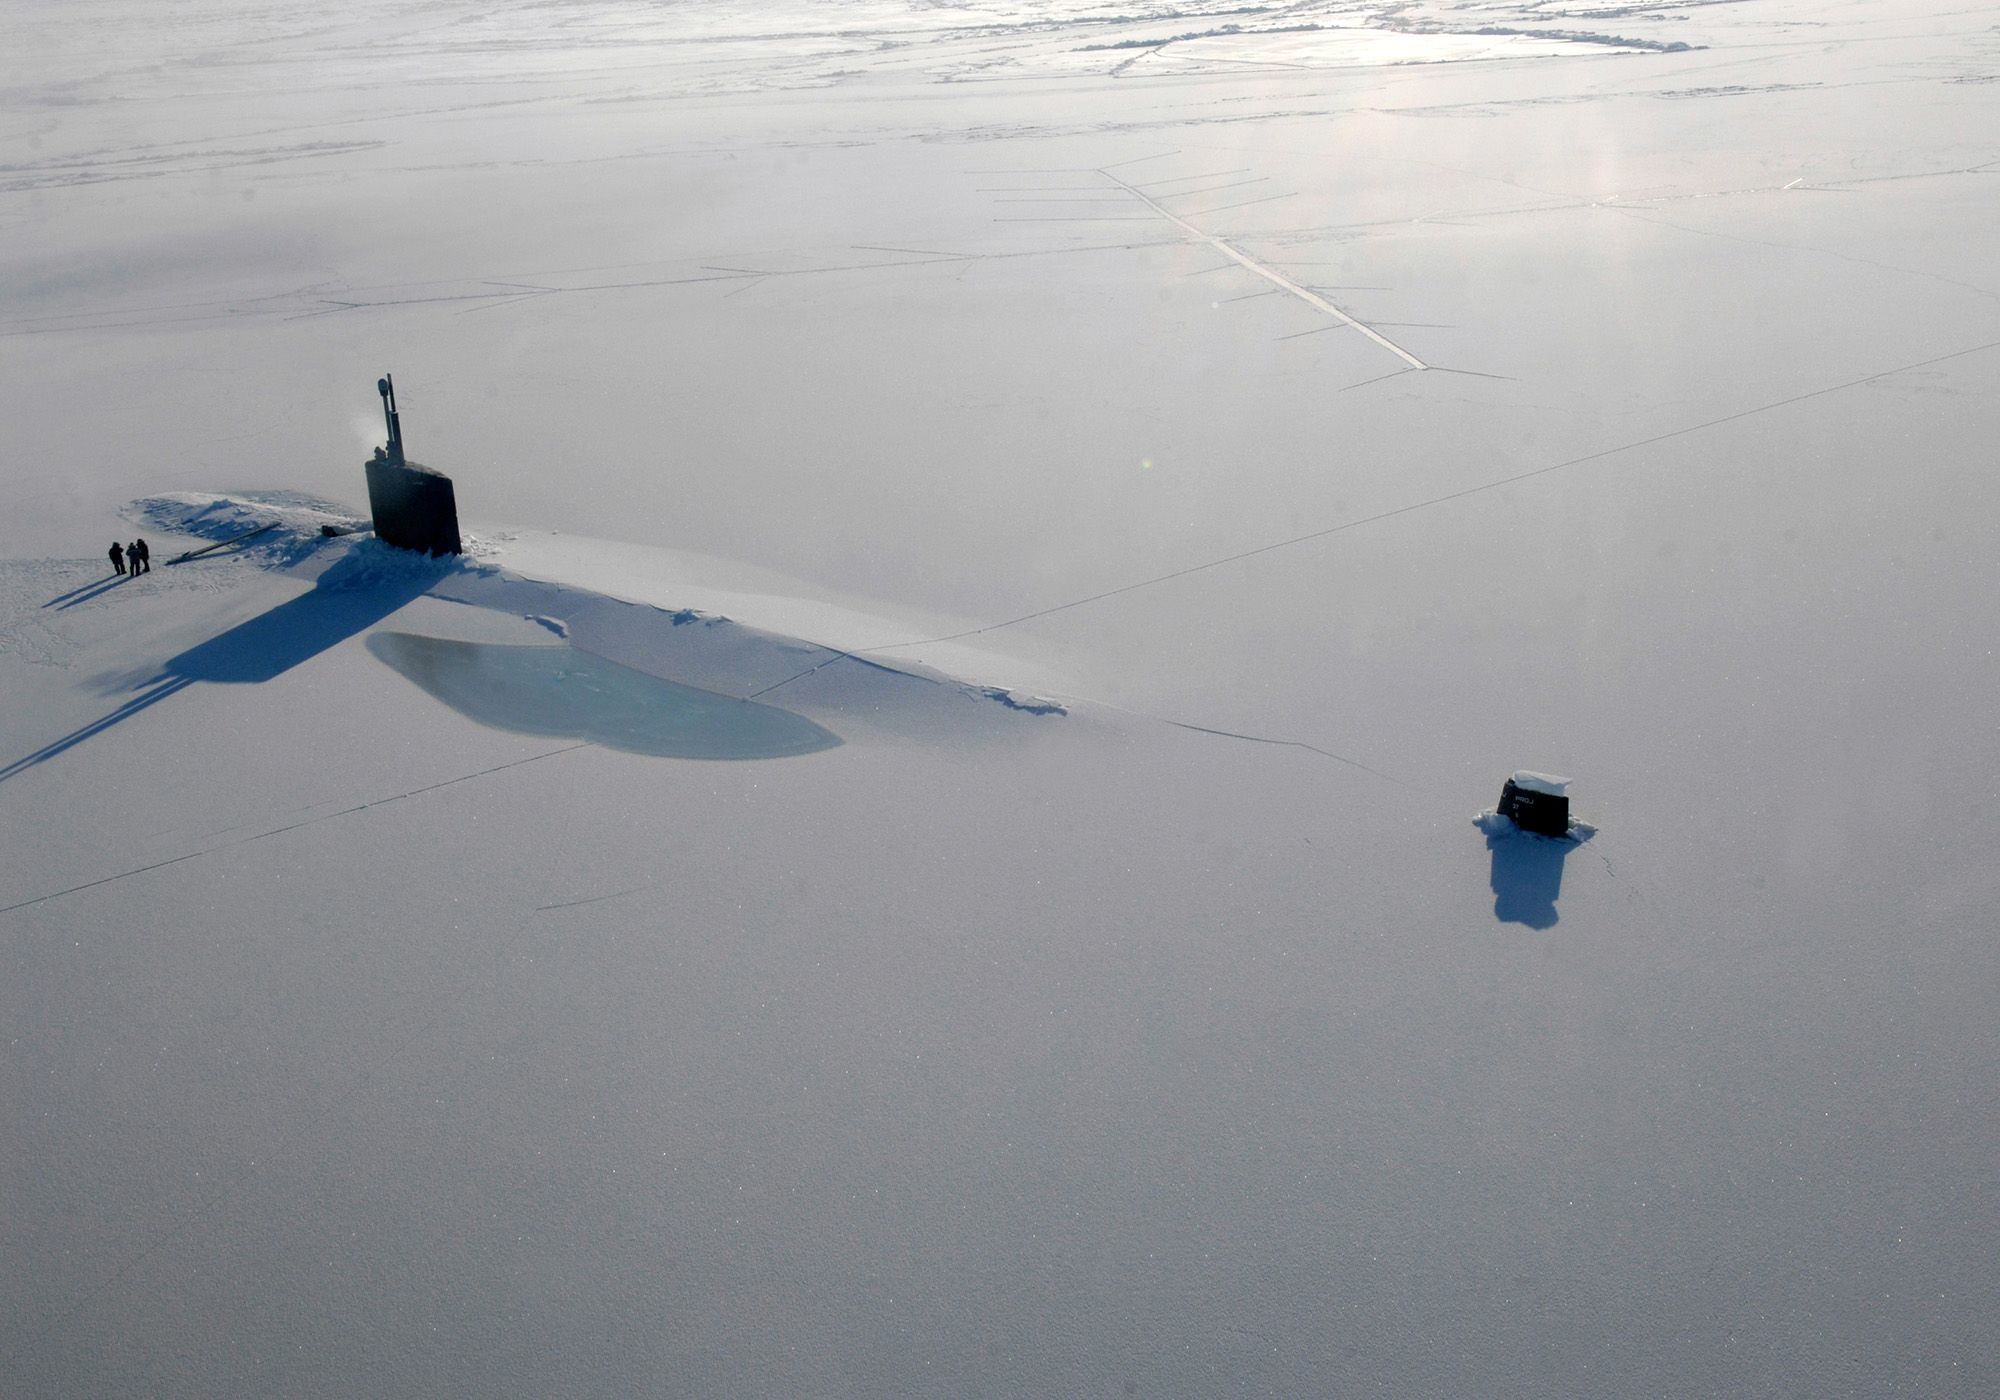 US Navy attack submarine USS Annapolis rests in the Arctic Ocean after surfacing through three feet of ice during Ice Exercise 2009 on 21 March 2009. Wikimedia